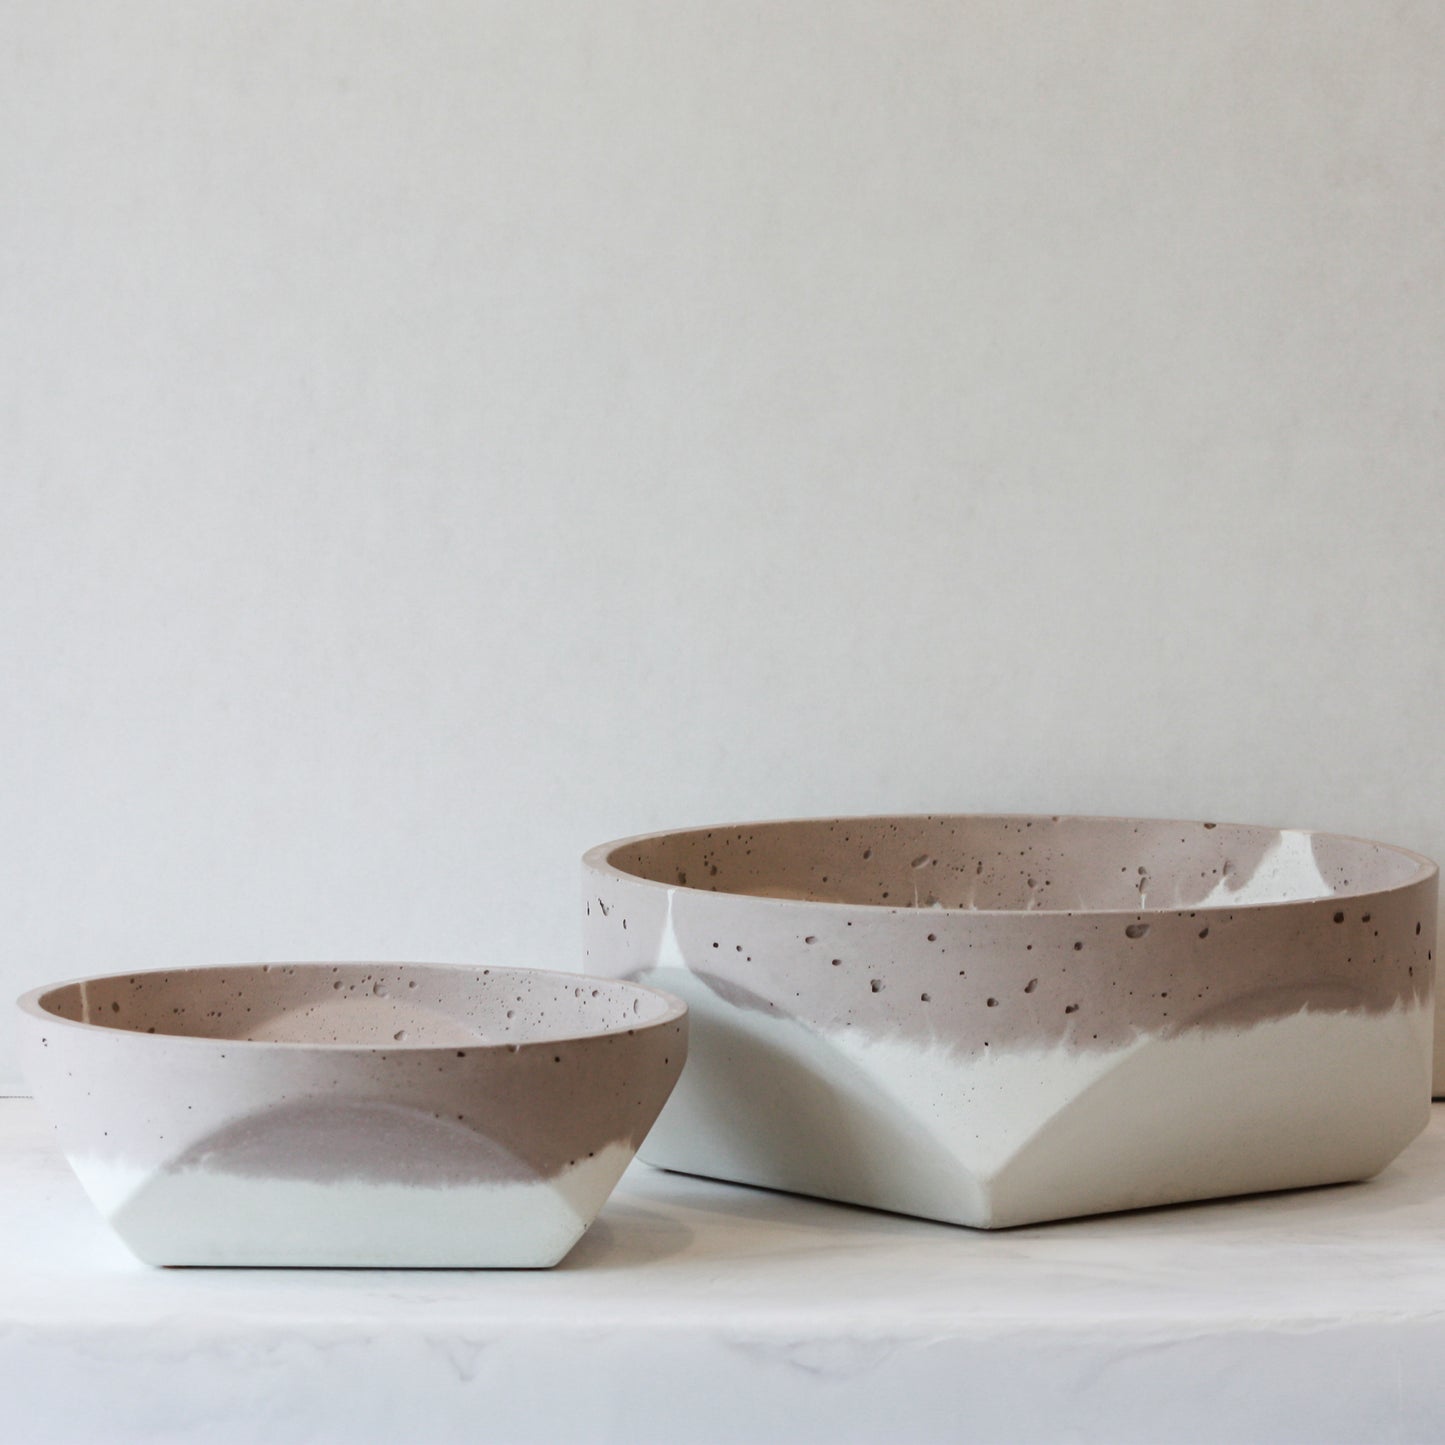 Cori x Anyon Bowls - Desert in small and large